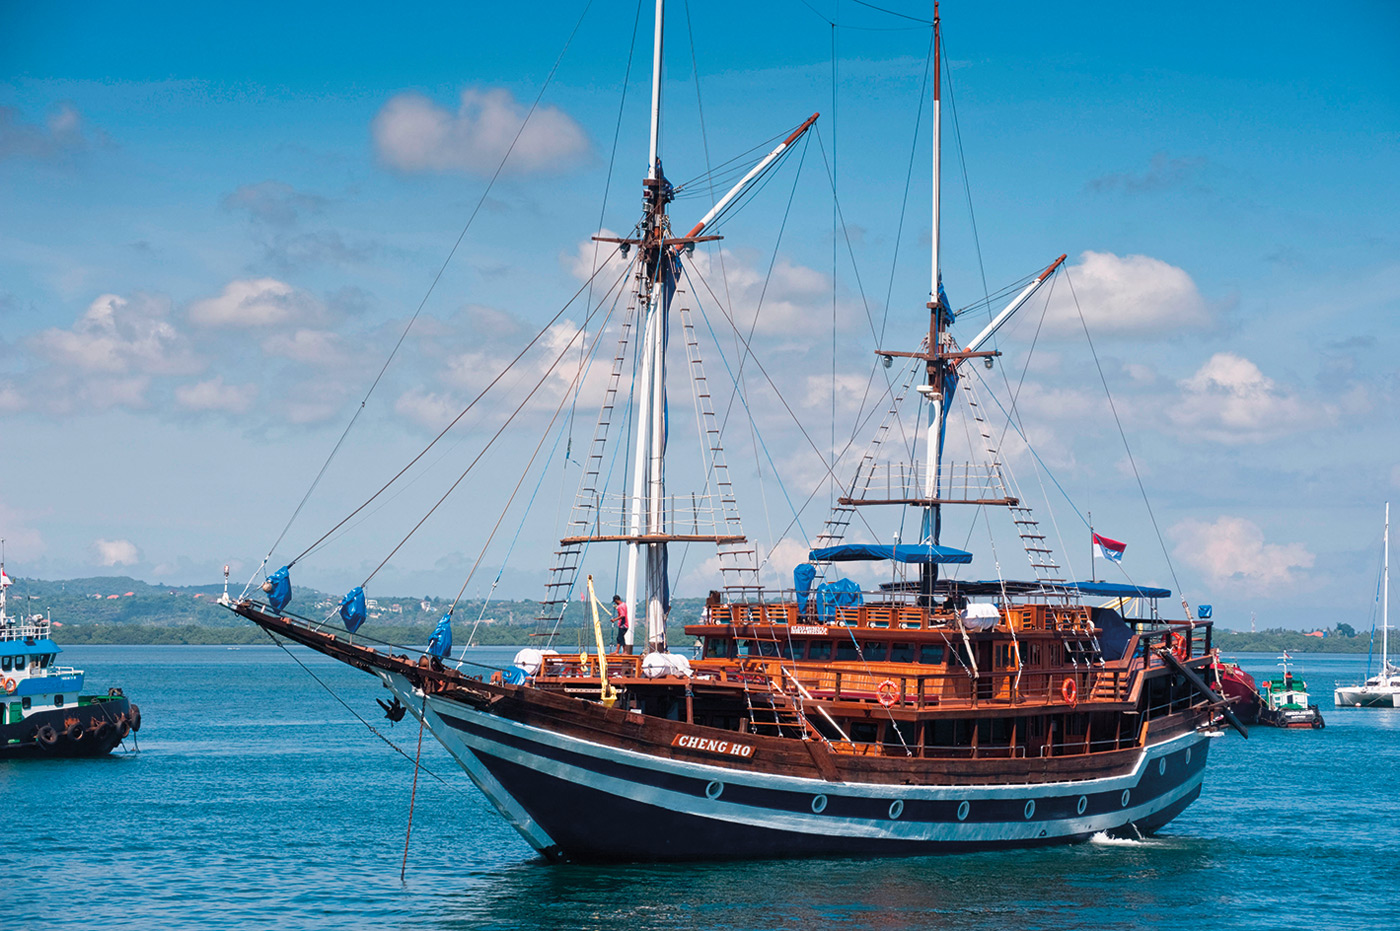 Resting at anchor in Bali, the 33-meter, 24-passenger Cheng Ho is one of many relatively new pinisi offering live-aboard diving and sailing in waters open only to boats built and registered in Indonesia.